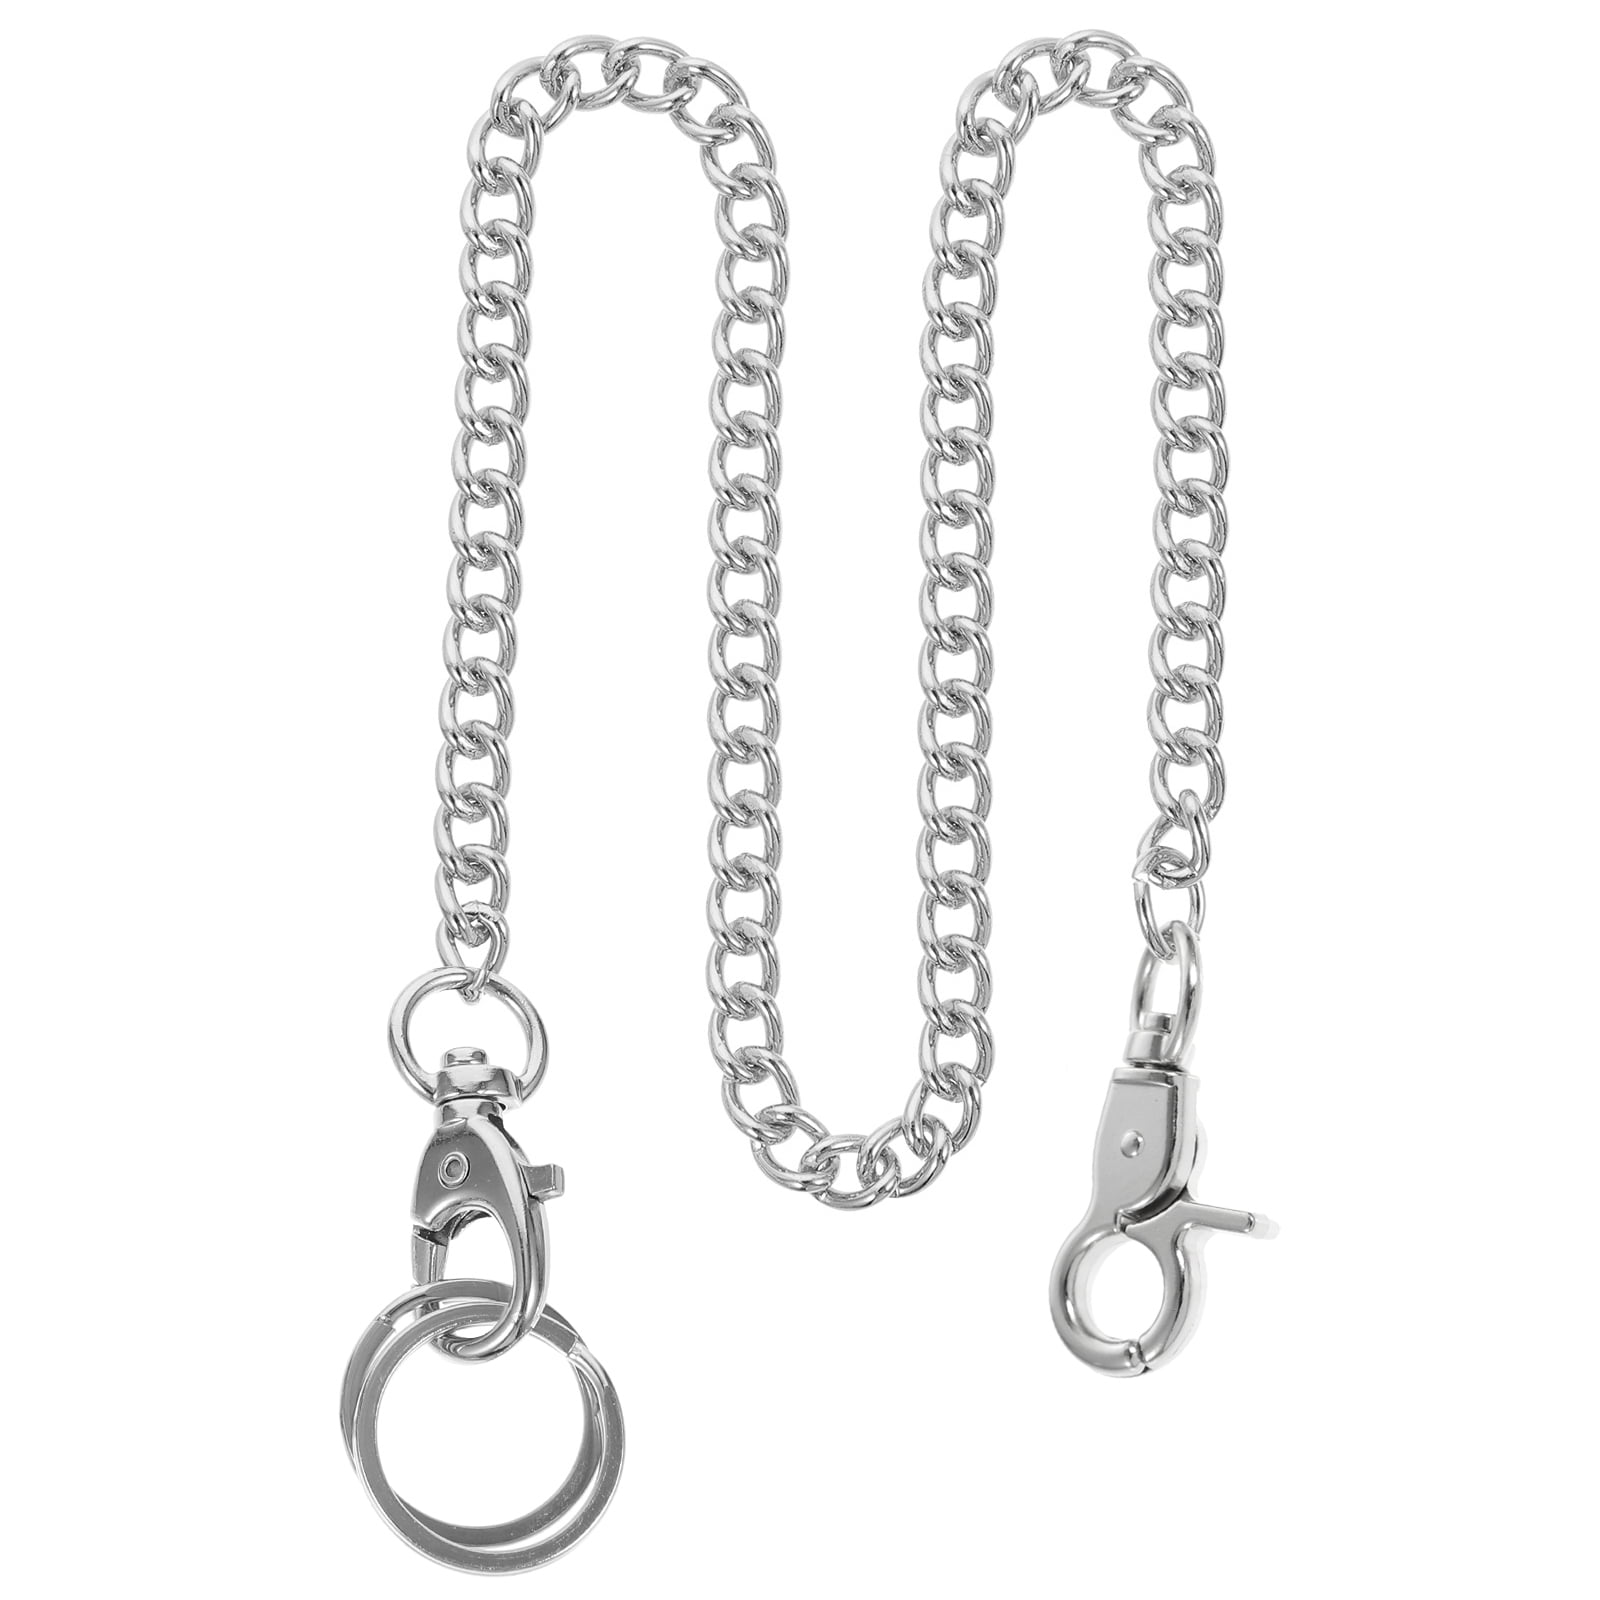 1pc Practical Hanging Chain Creative Pocket Watch Chain Clothing Chain ...